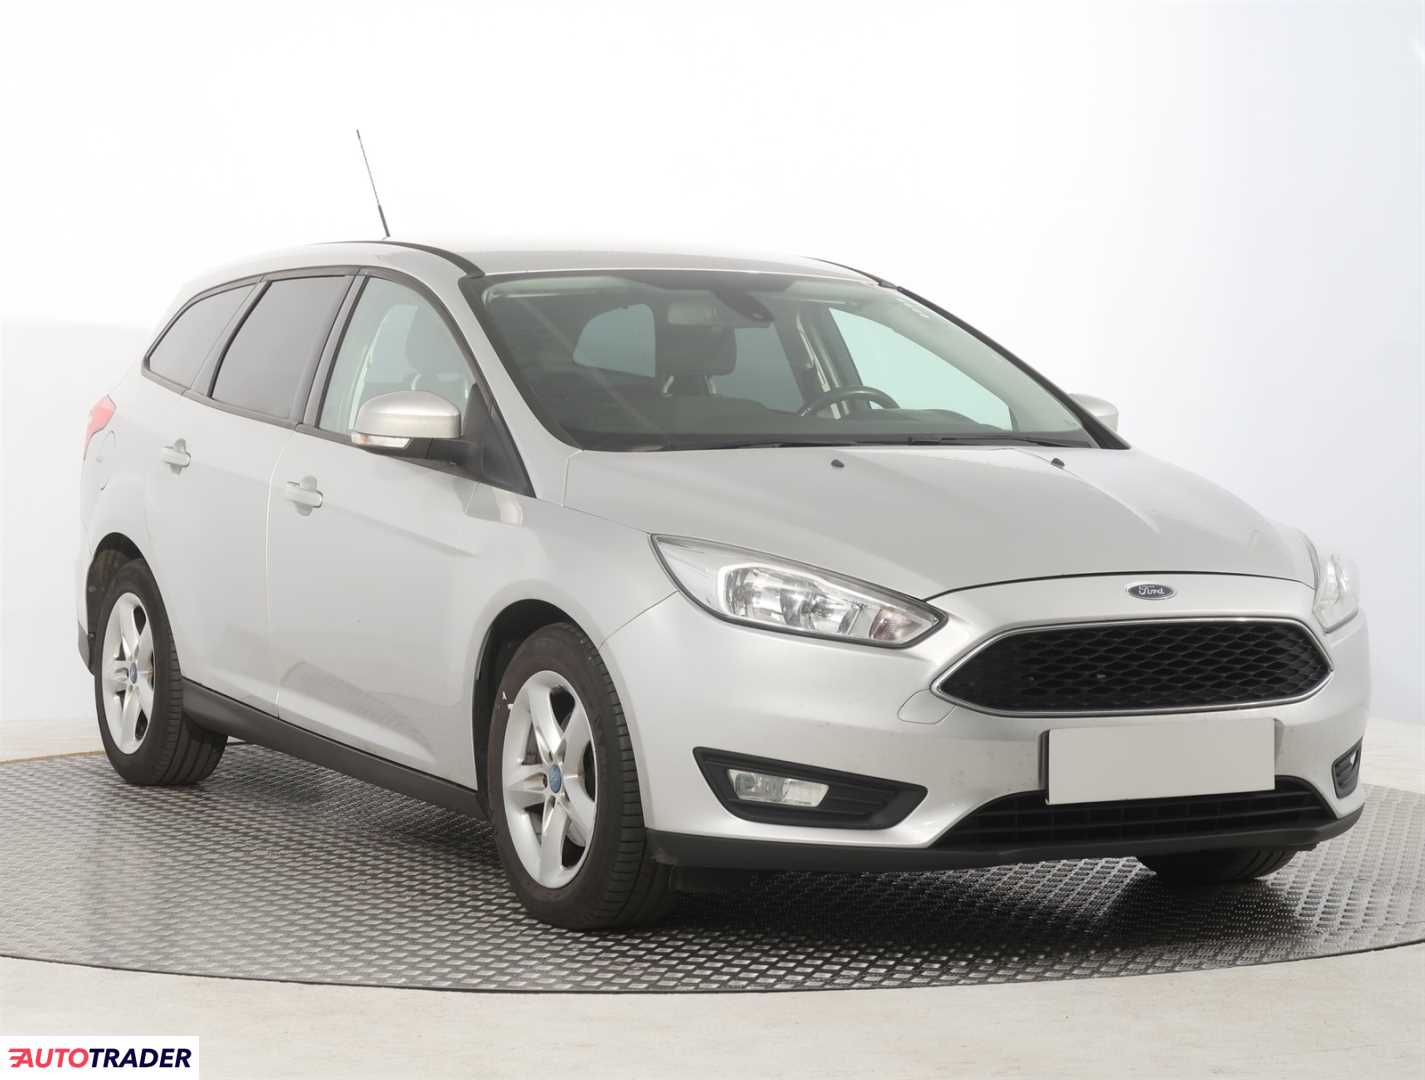 Ford Focus 2015 1.6 113 KM